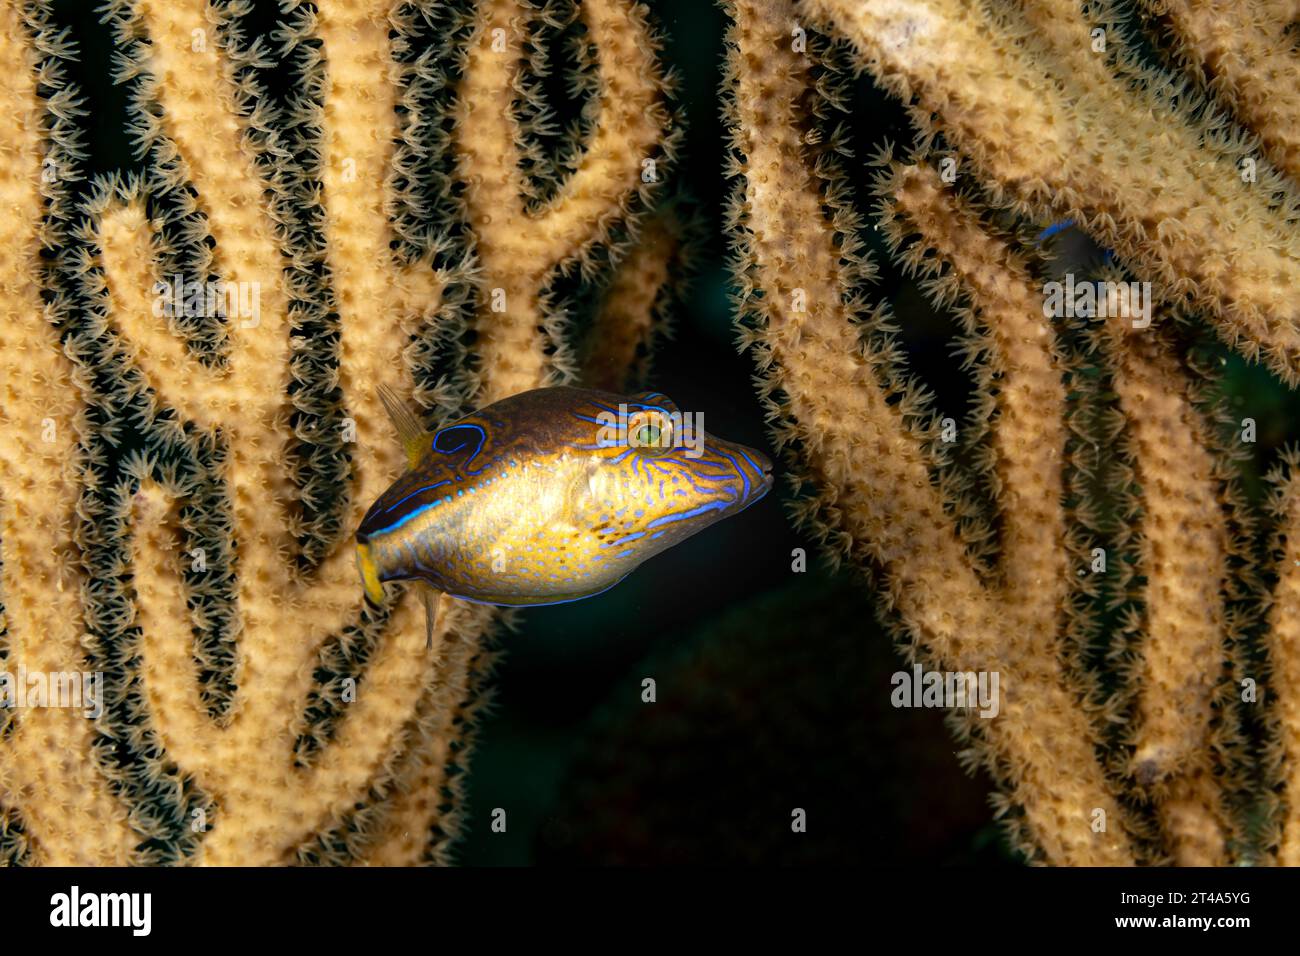 Juvenile blue-spotted puffer fish, Canthigaster solandri, hides by swimming close to soft coral Stock Photo